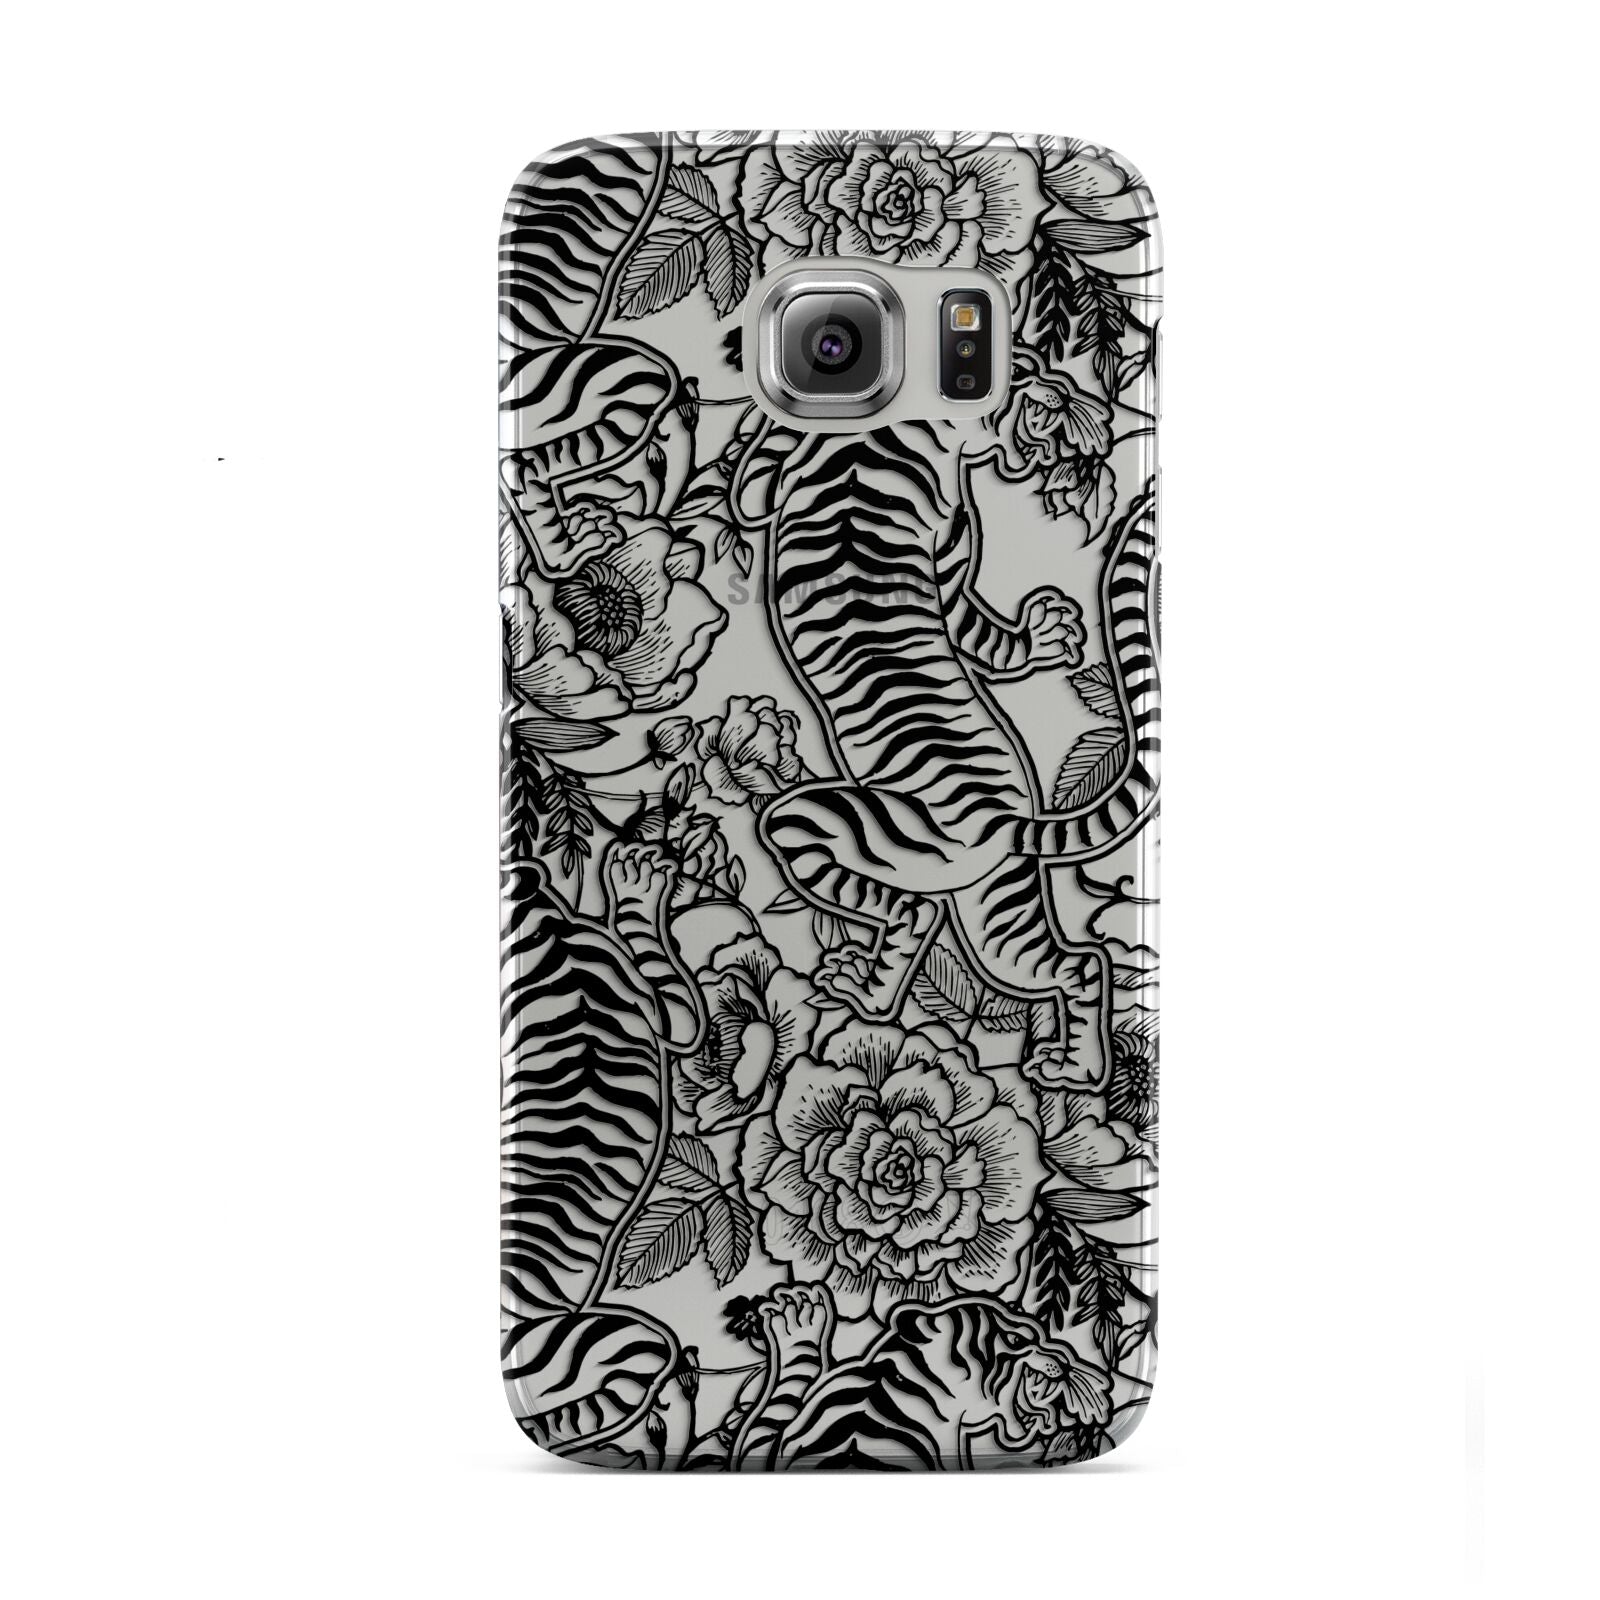 Chinese Tiger Samsung Galaxy S6 Case